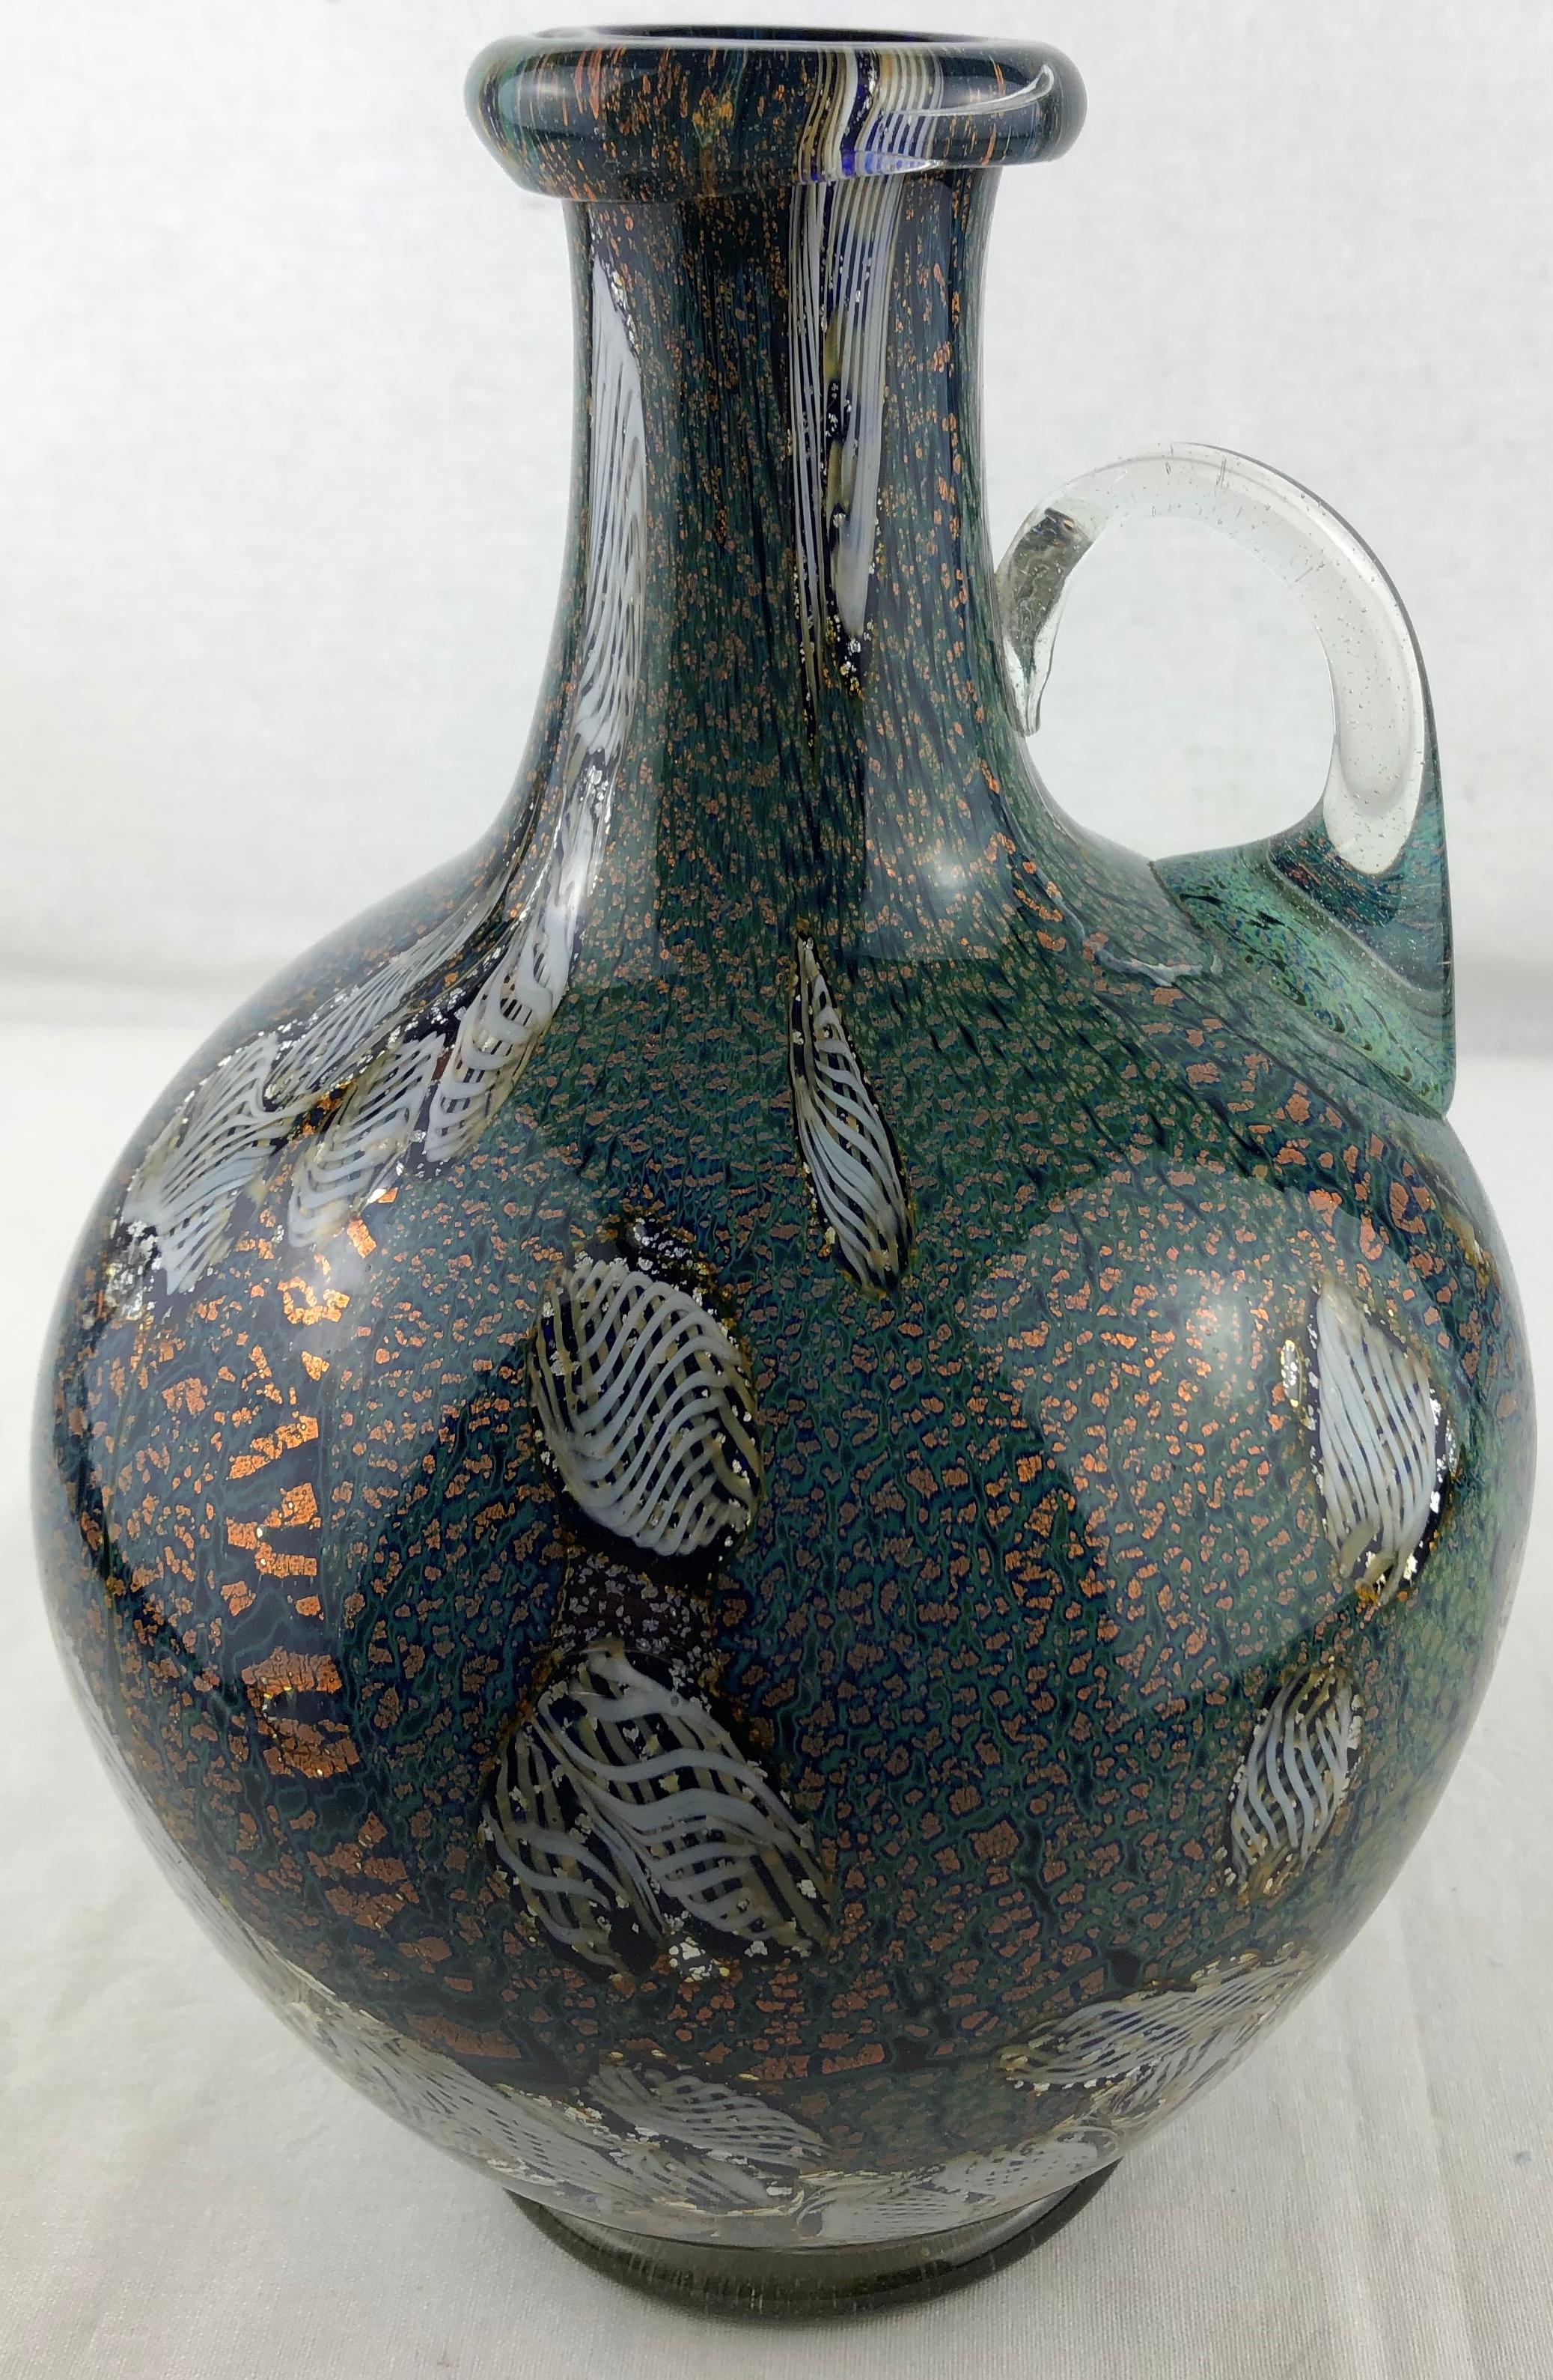 Jean-Claude Novarro Style Large Art Glass Stem Vase by Michèle Luzoro In Good Condition For Sale In Miami, FL